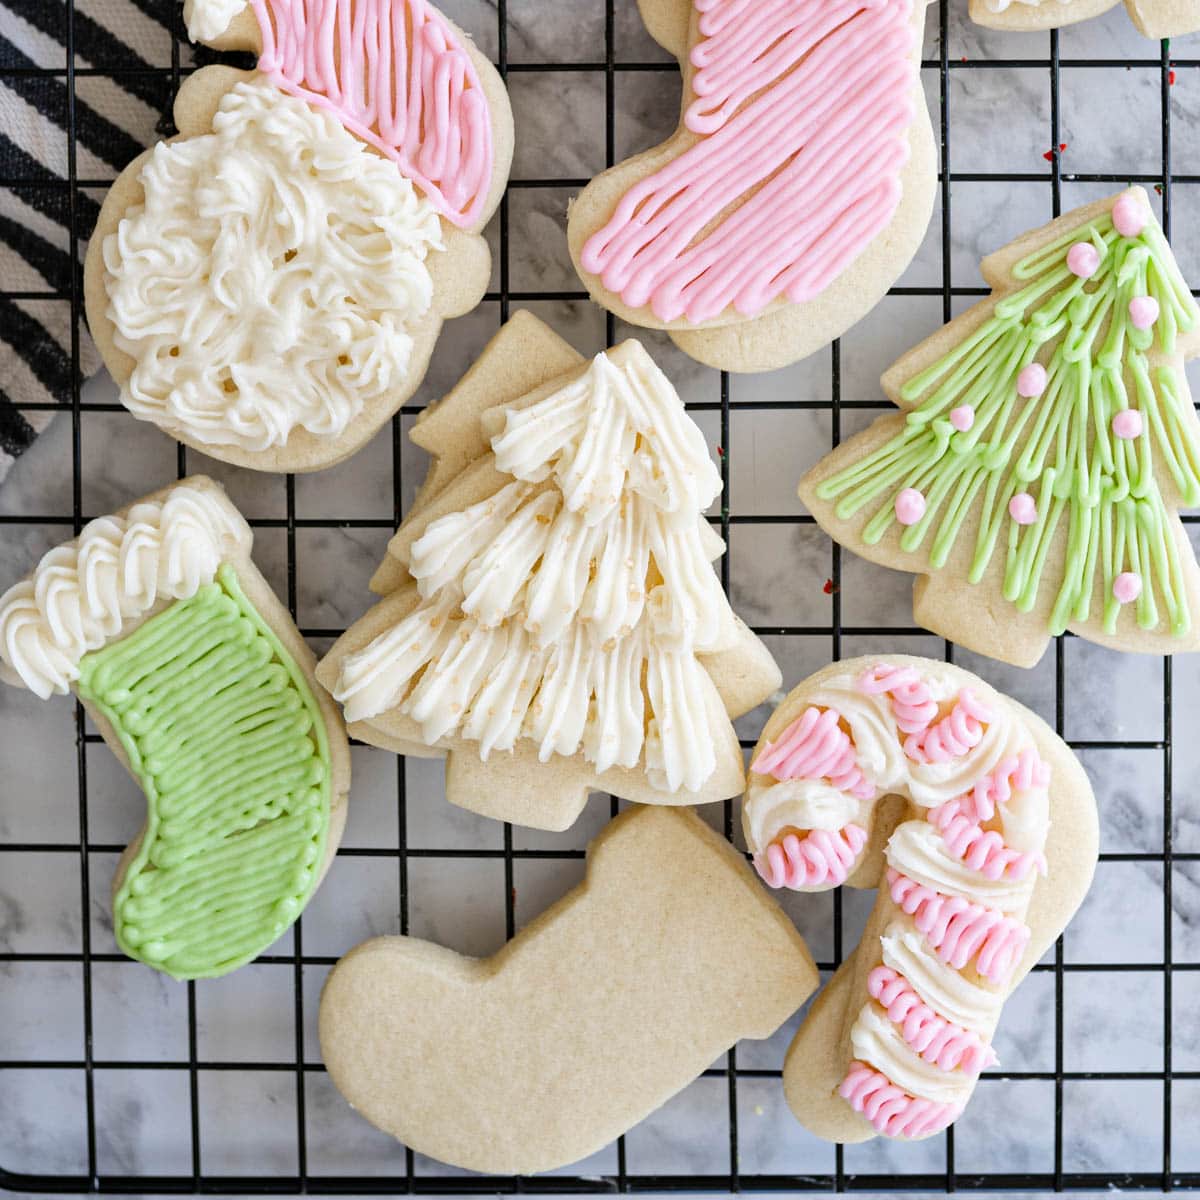 https://cookingwithkarli.com/wp-content/uploads/2018/03/christmas-sugar-cookies-ft.jpg